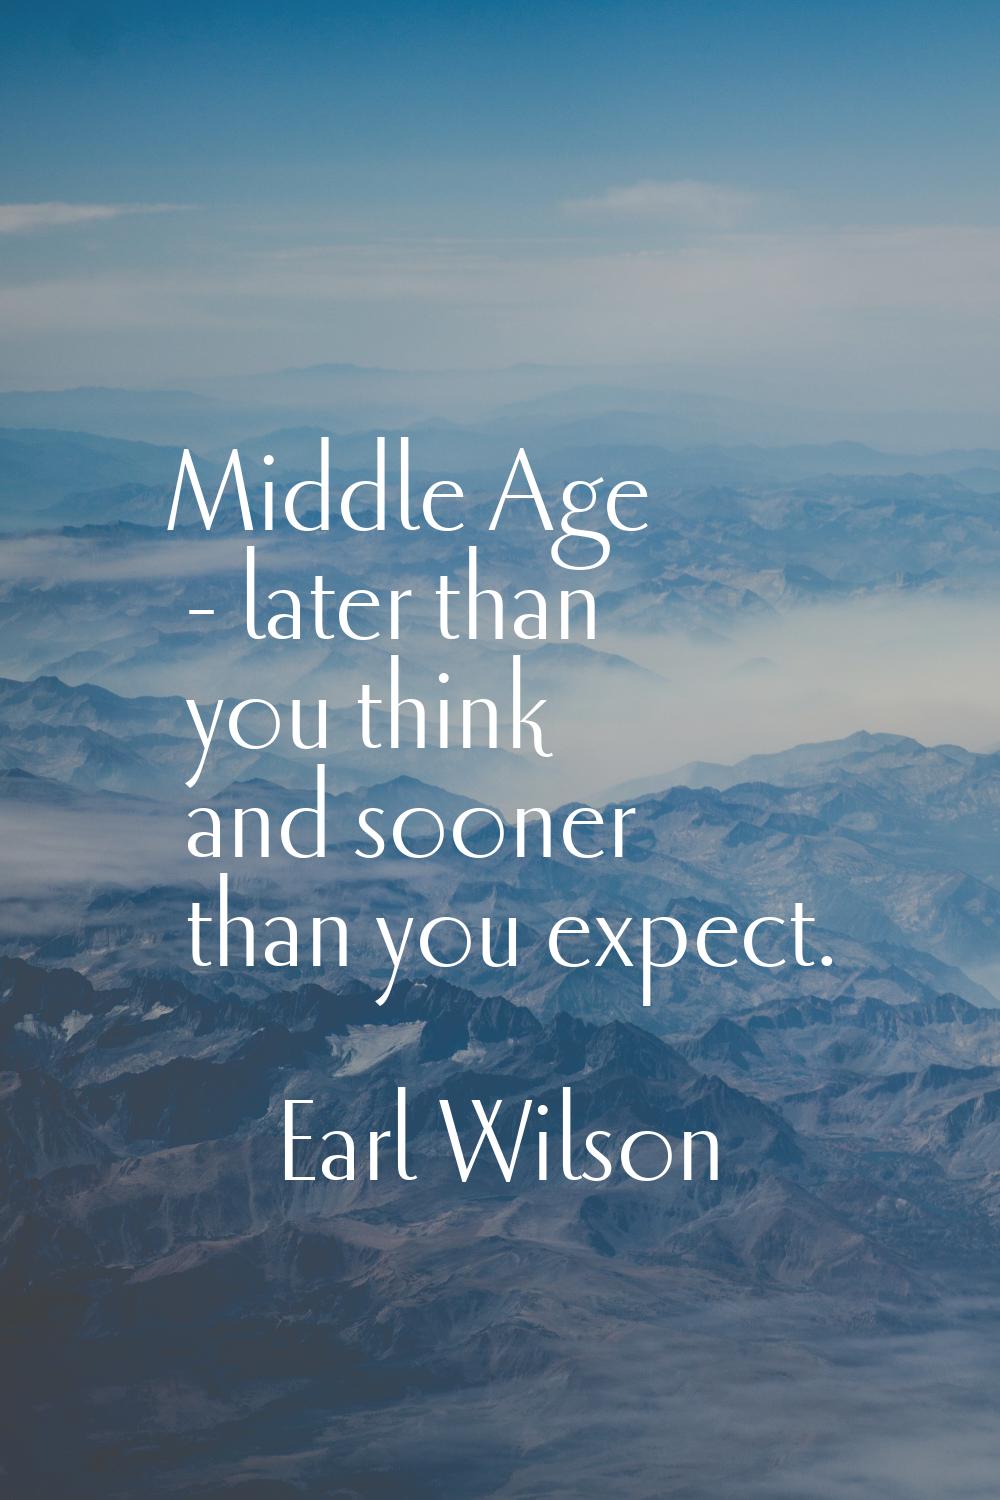 Middle Age - later than you think and sooner than you expect.